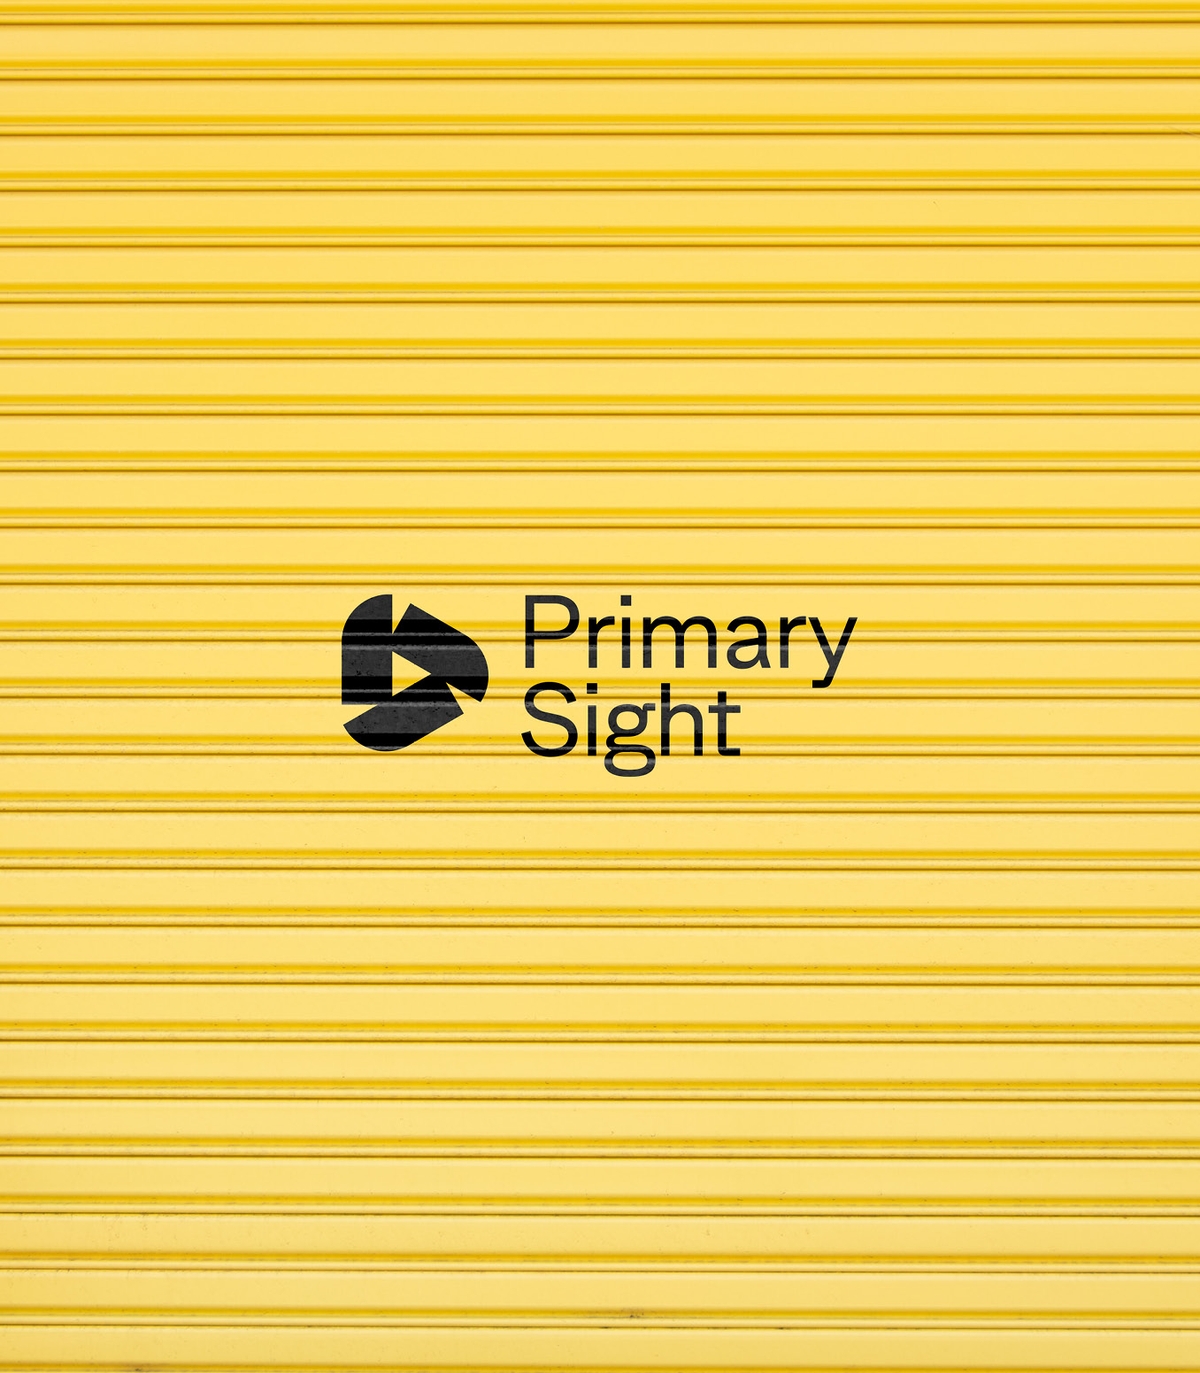 Primary Sight - Brand and Website - Logo on Roller Door | Atollon - a design company